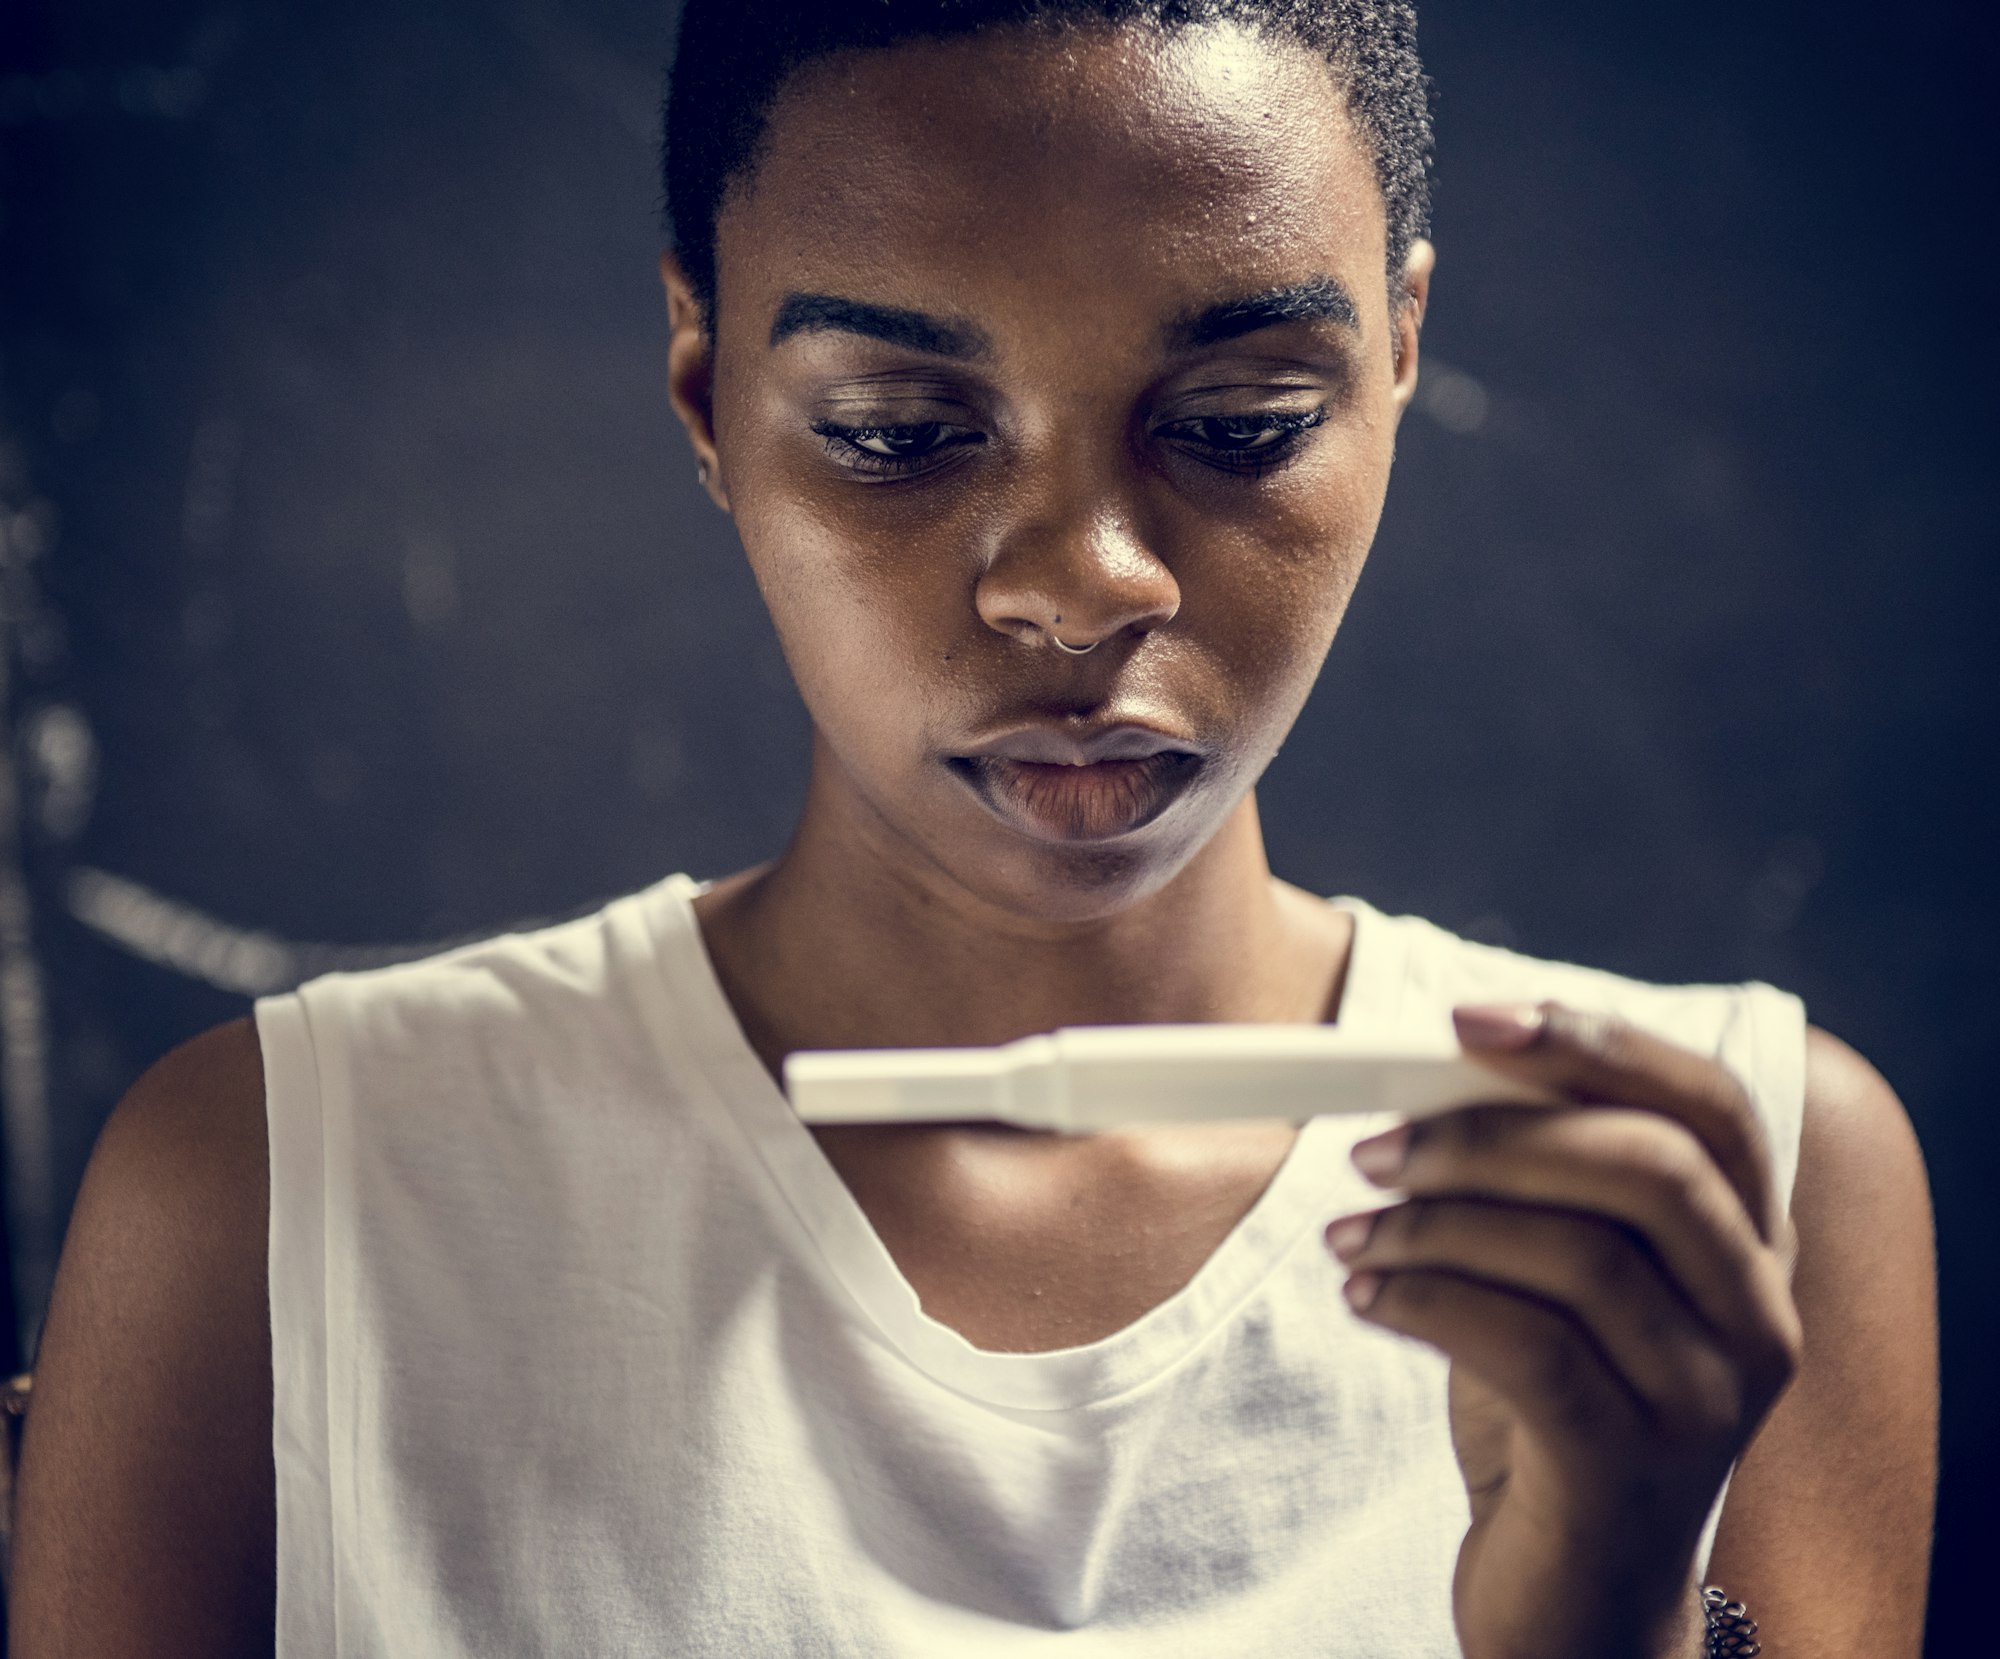 Closeup of black woman with pregnancy test in a hand